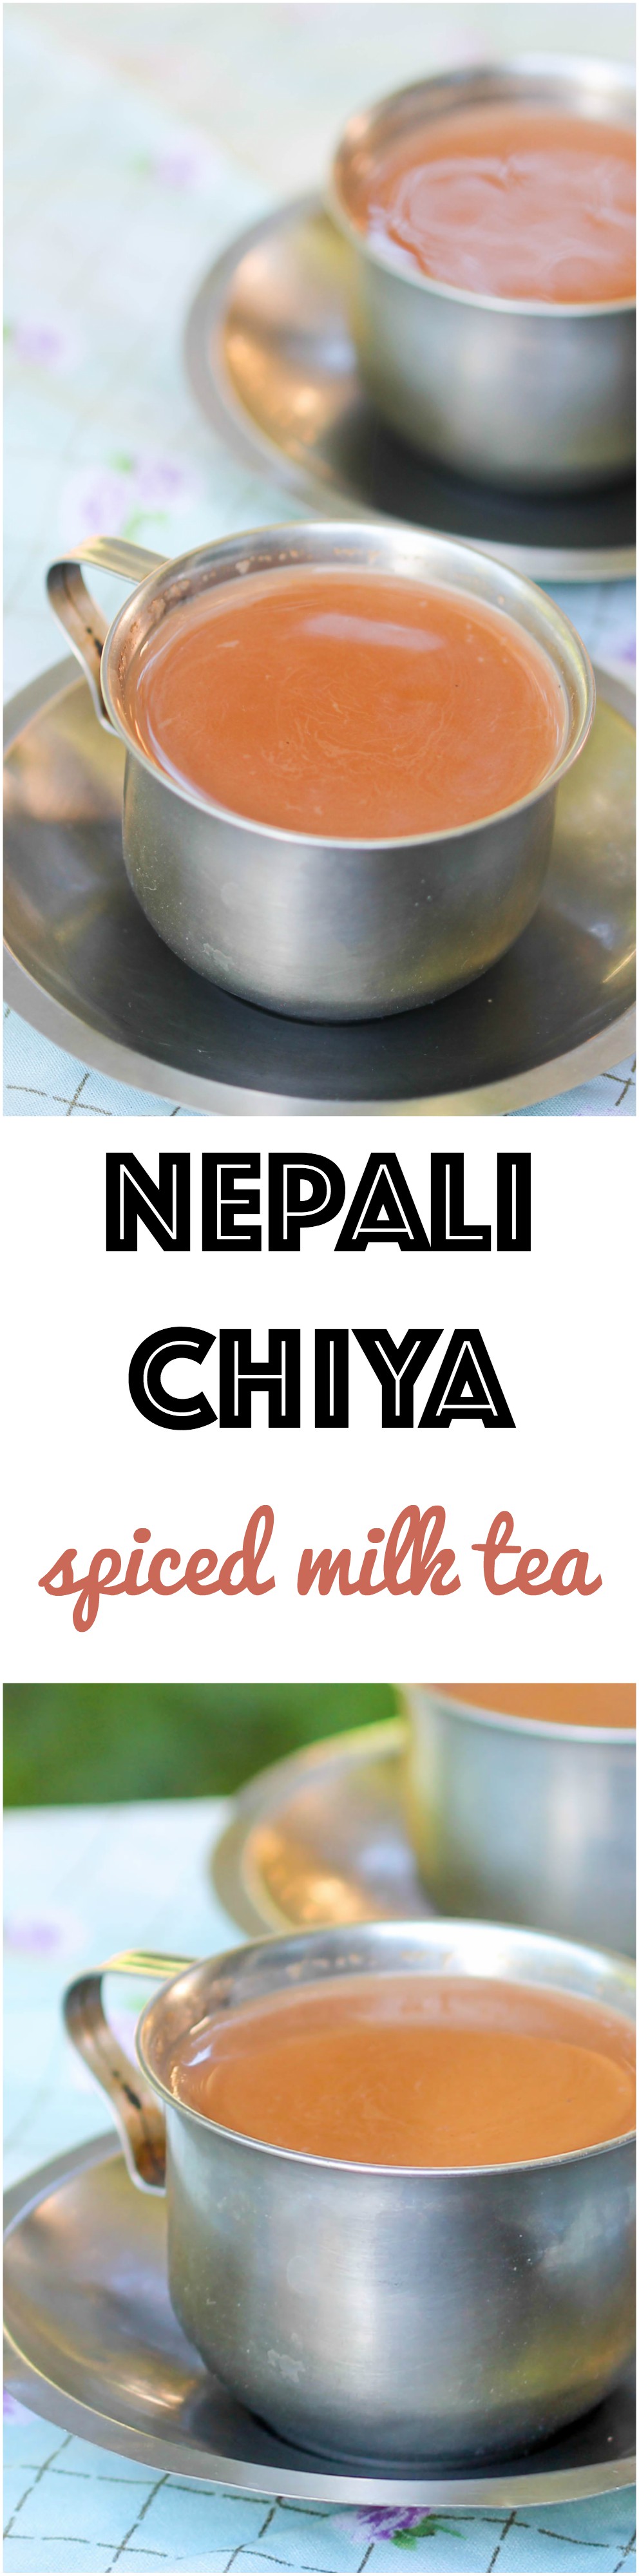 Nepali Chiya is a milk-based spiced tea enjoyed by most Nepali. It is flexible to meet different lifestyles and can be be adjusted to serve yourself or a large crowd.